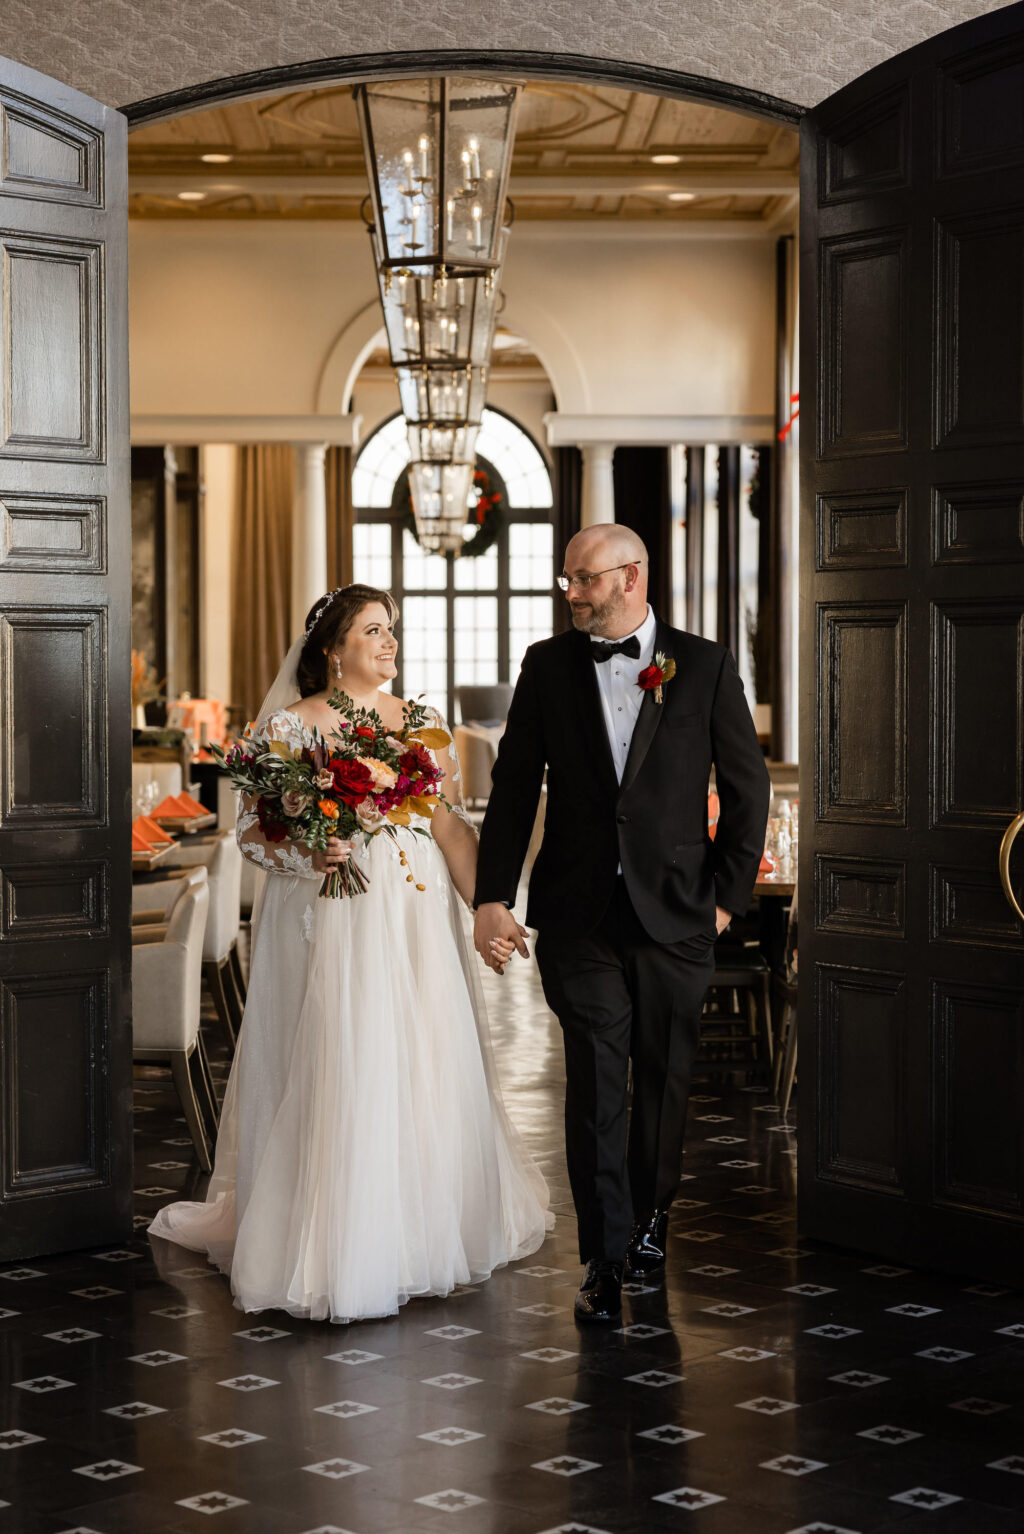 Bride and Groom Indoor Wedding Portrait | Lakeland Photographer Garry and Stacy Photography | Venue The Terrace Hotel